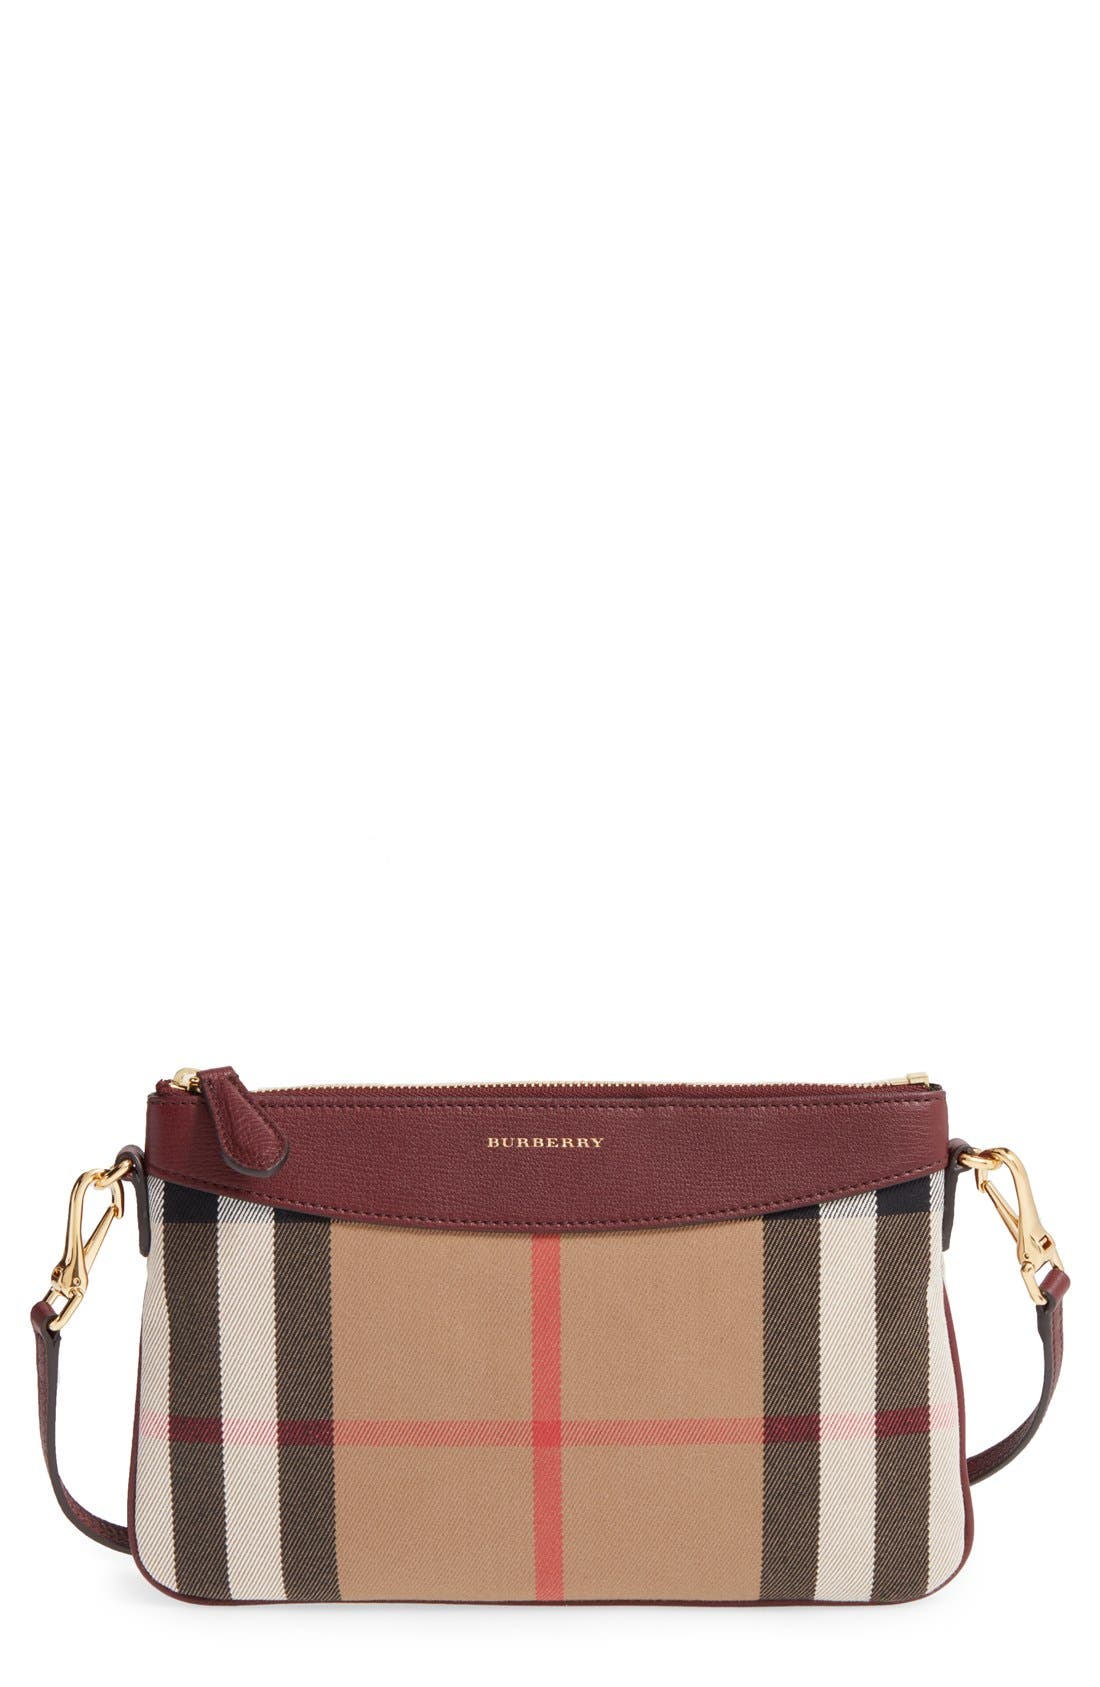 Burberry On Sale Nordstrom | The Art of 